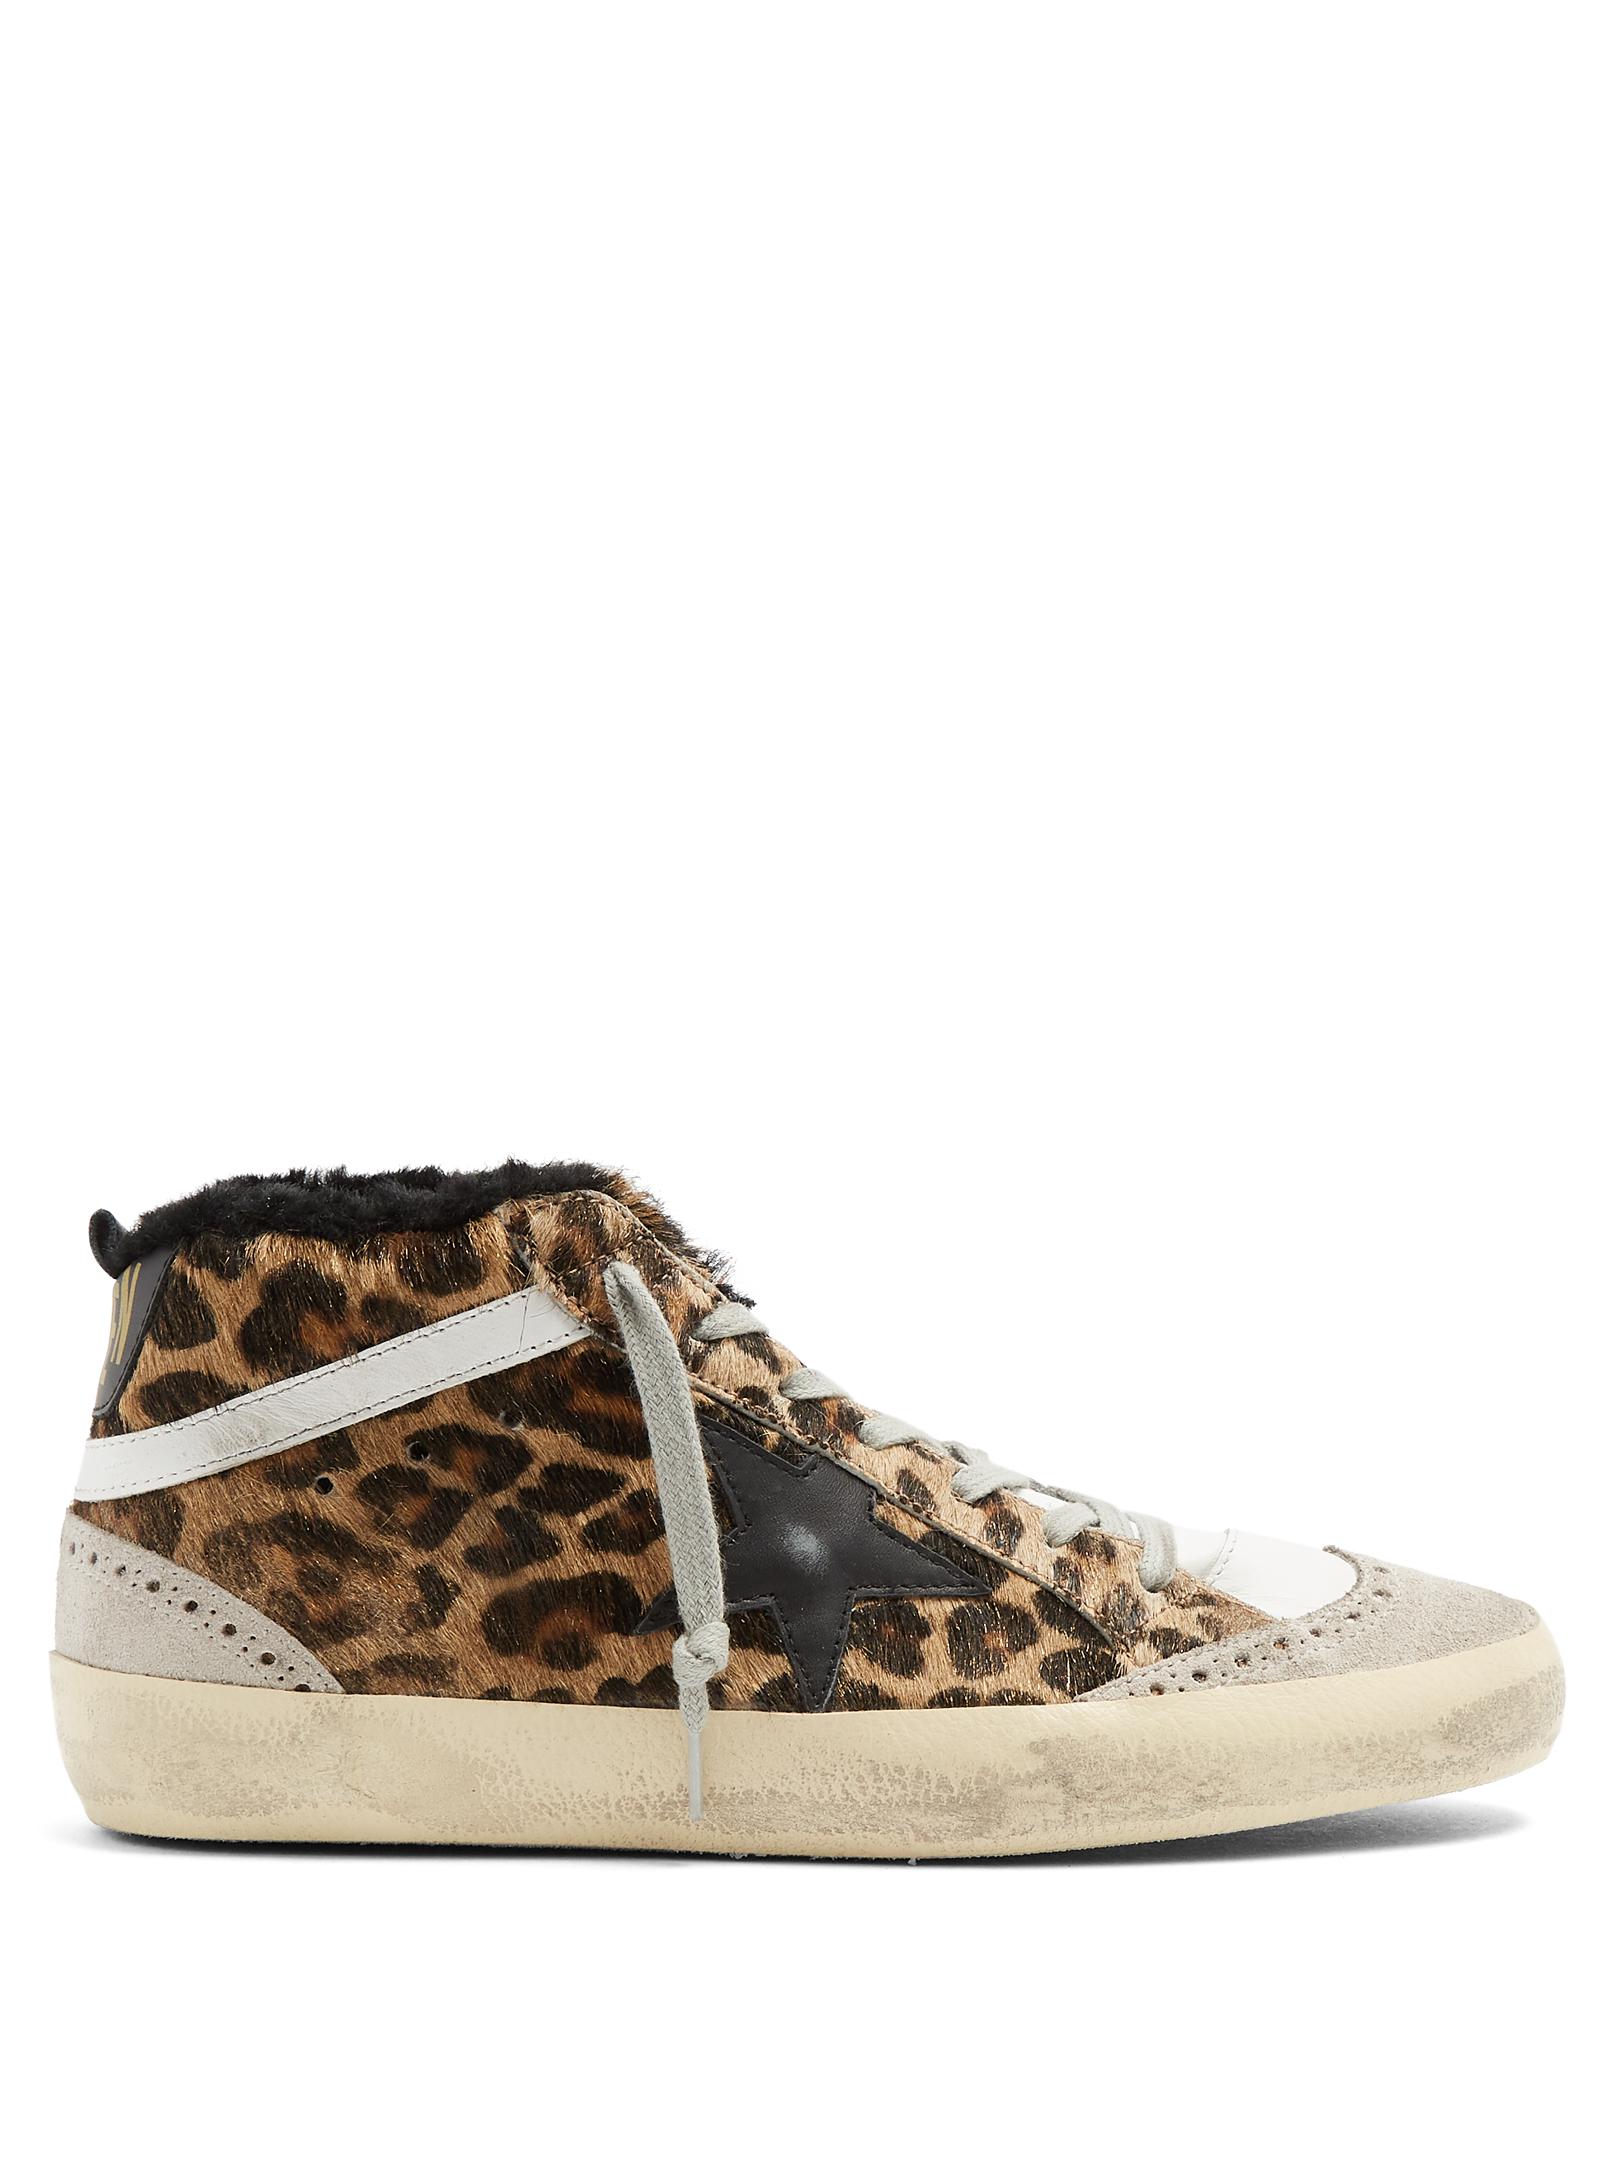 Lyst - Golden Goose Deluxe Brand Mid Star Leopard-print Shearling-lined